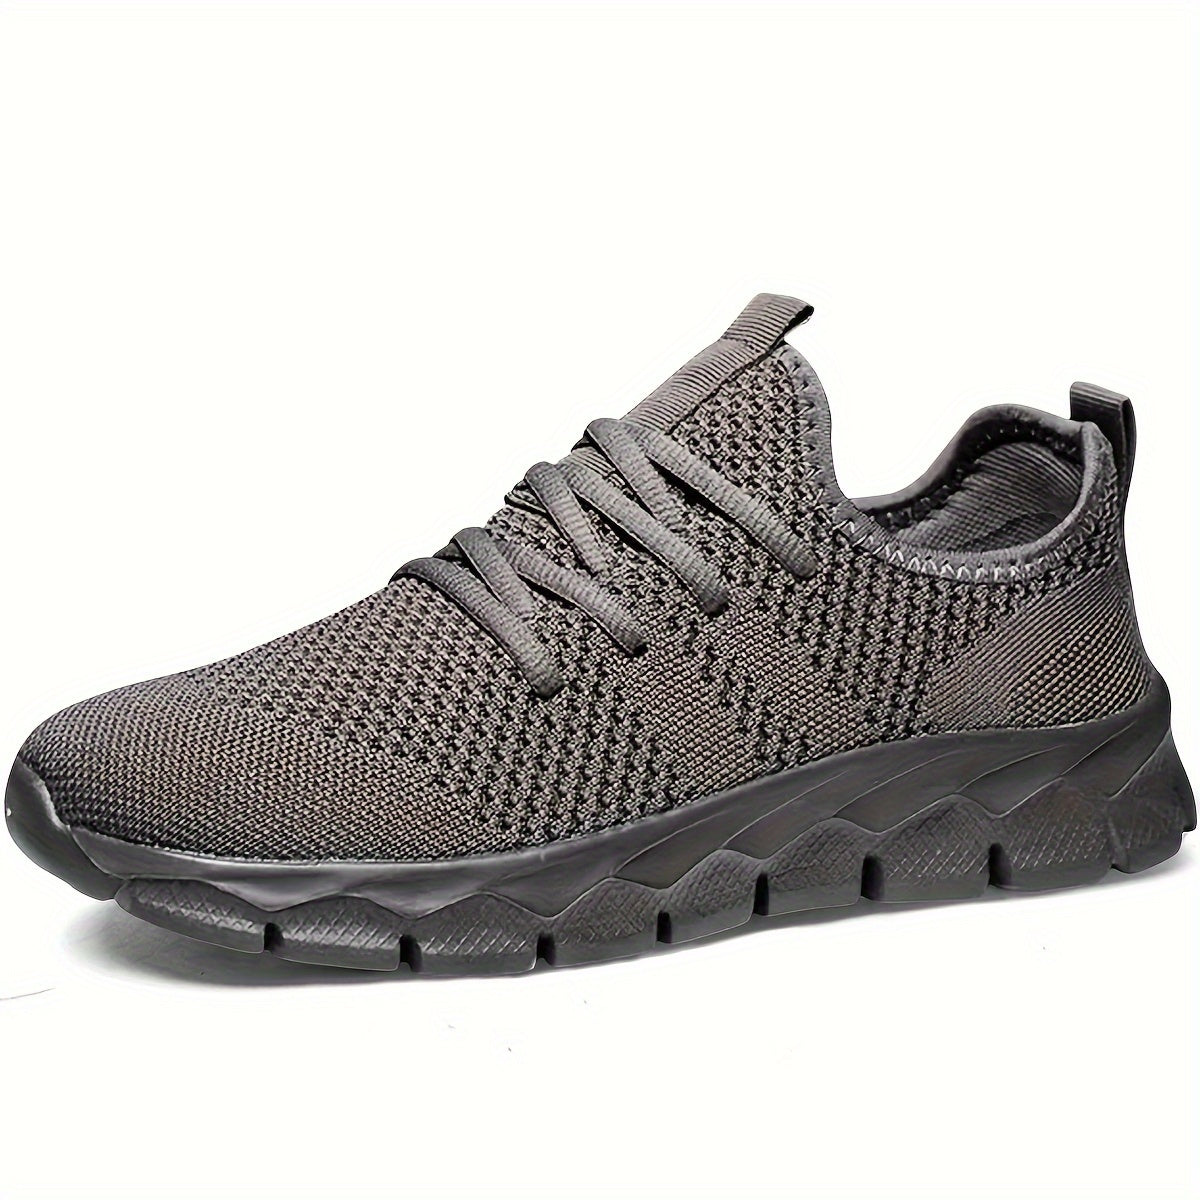 Men's Lightweight Sneakers, Athletic Shoes, Breathable Lace-ups